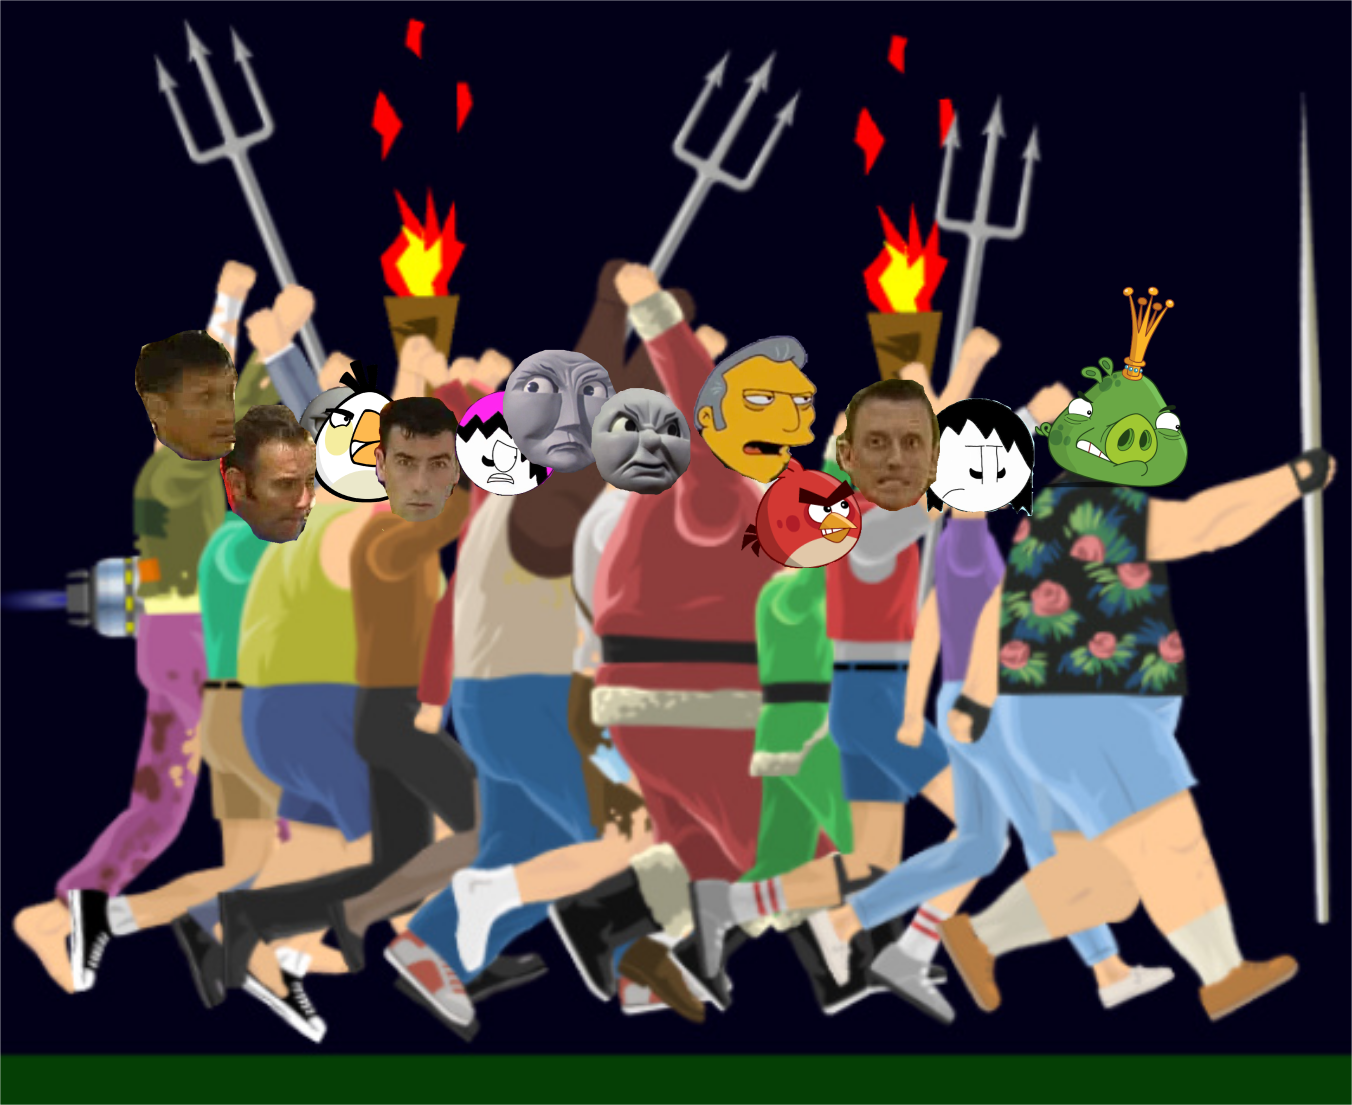 Happy Wheels my version 2 [Angry Mob Attack] by Dylanjjohnson1 on DeviantArt